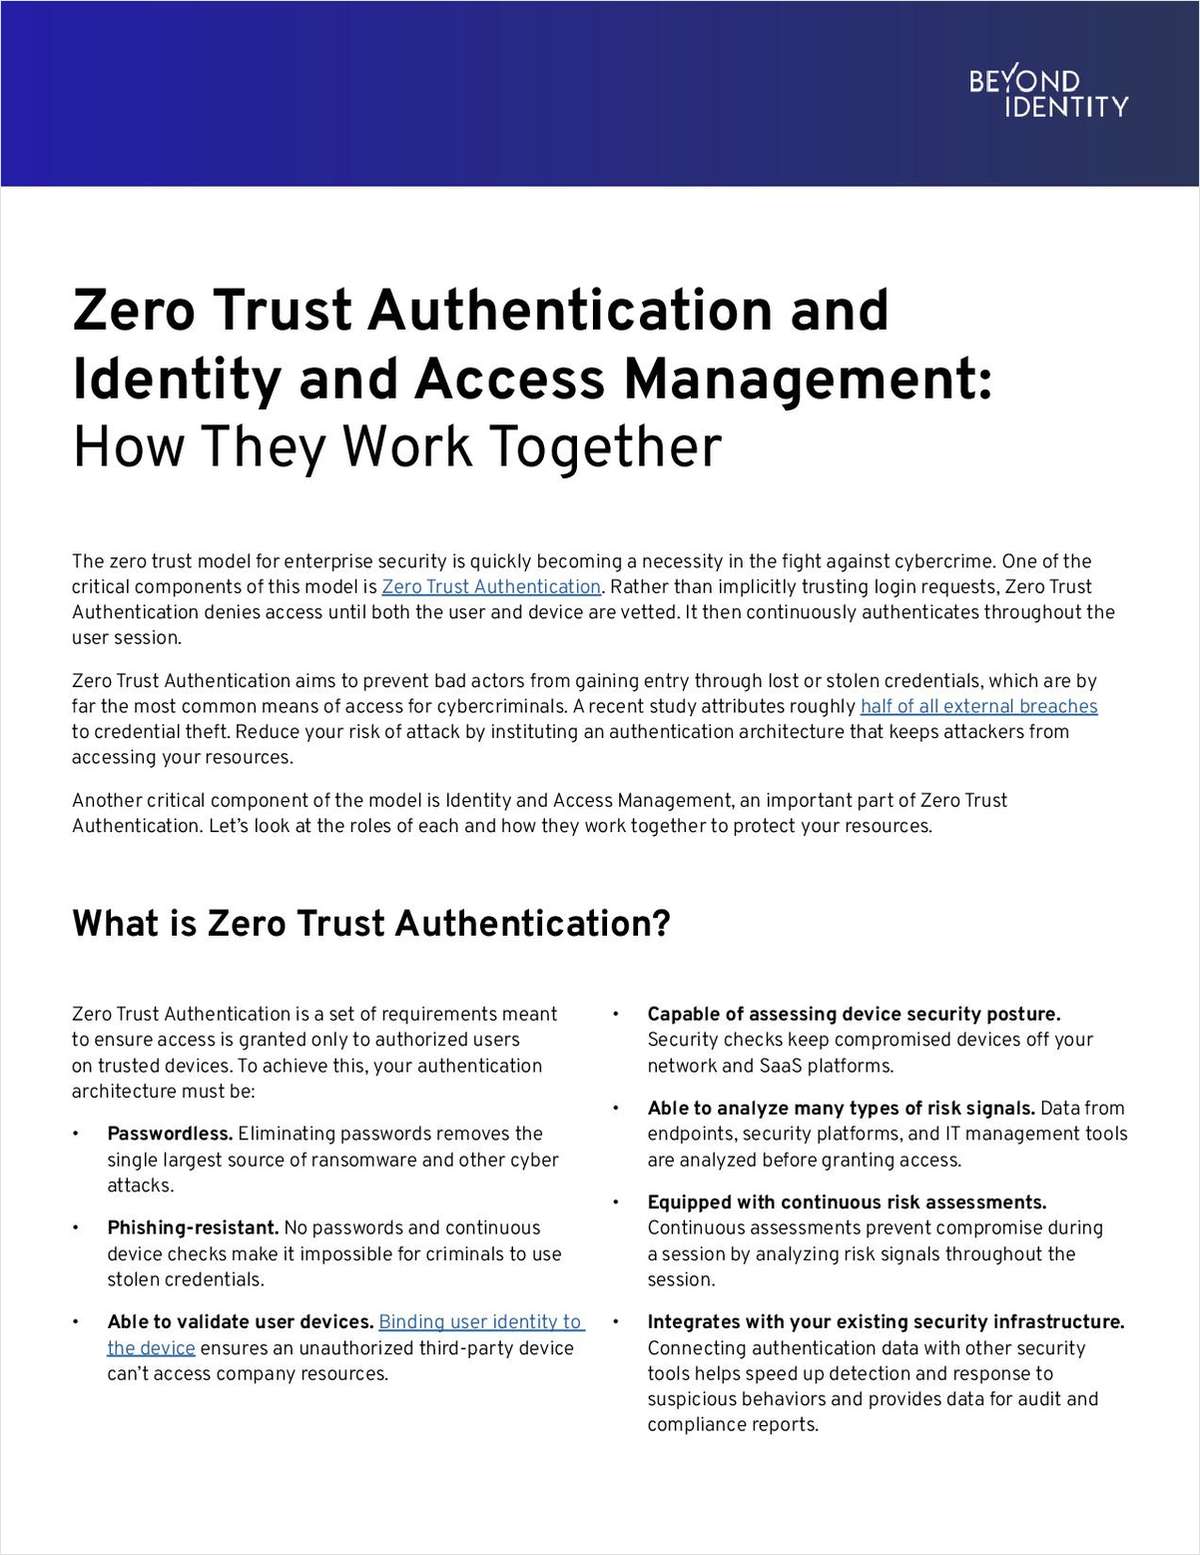 Zero Trust Authentication and Identity and Access Management: How They Work Together